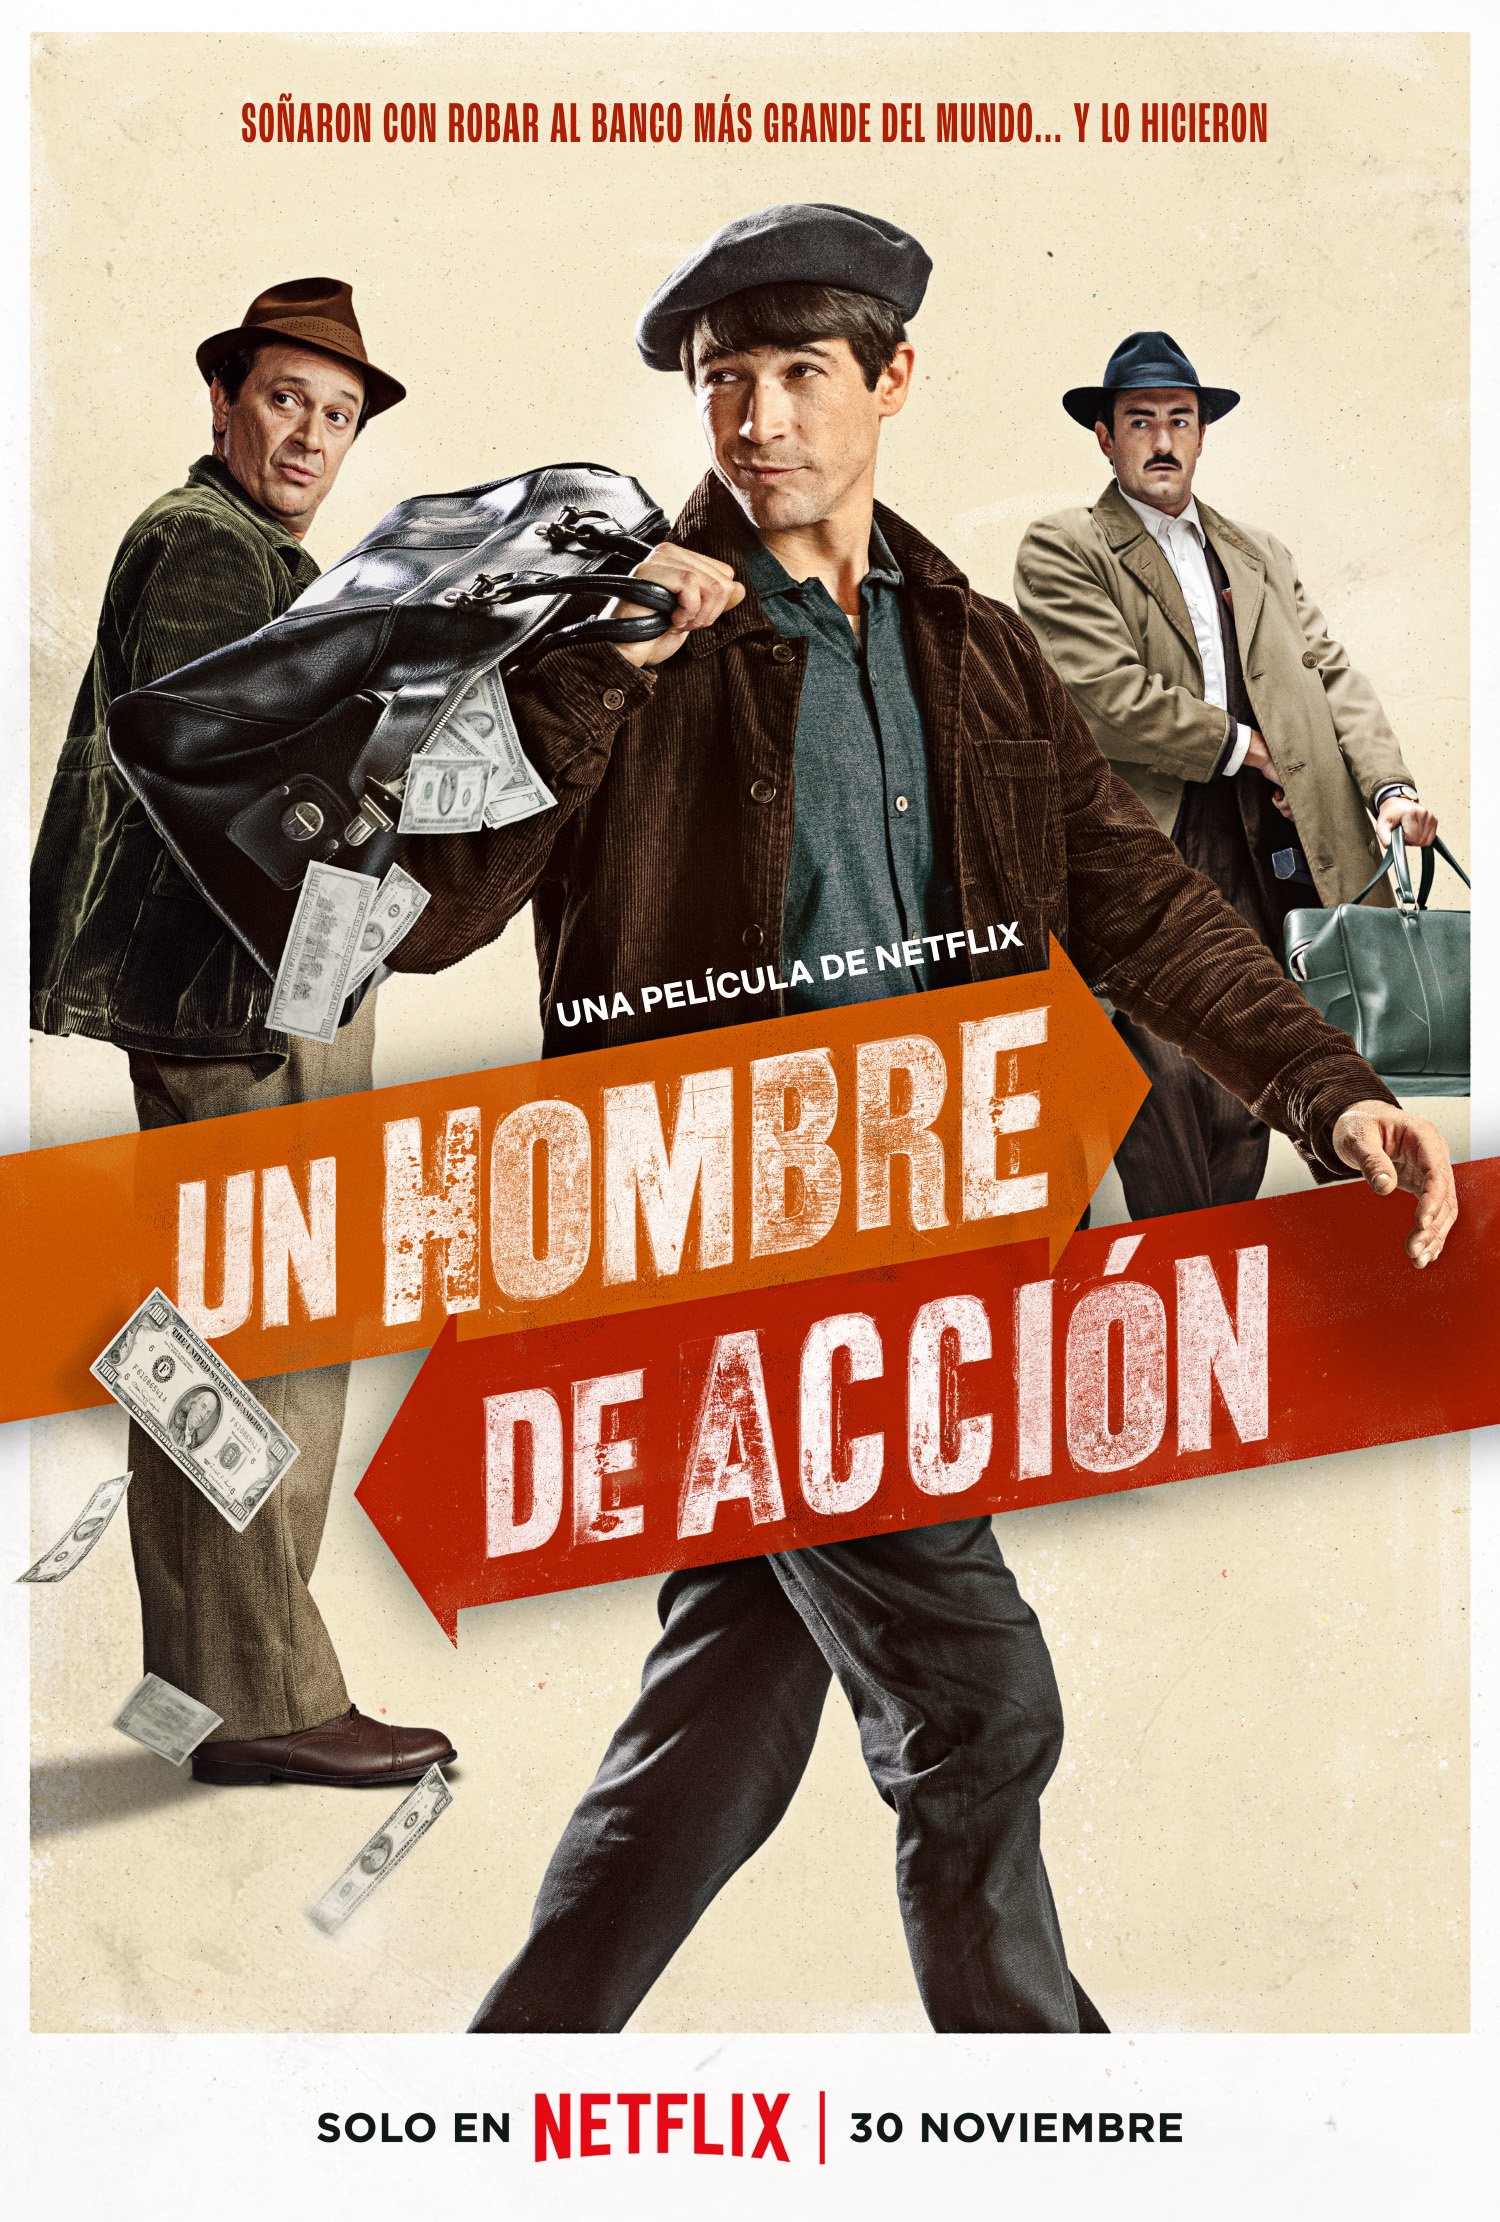 A Man of Action 2022 English 1080p NF HDRip MSub 1.5GB Download